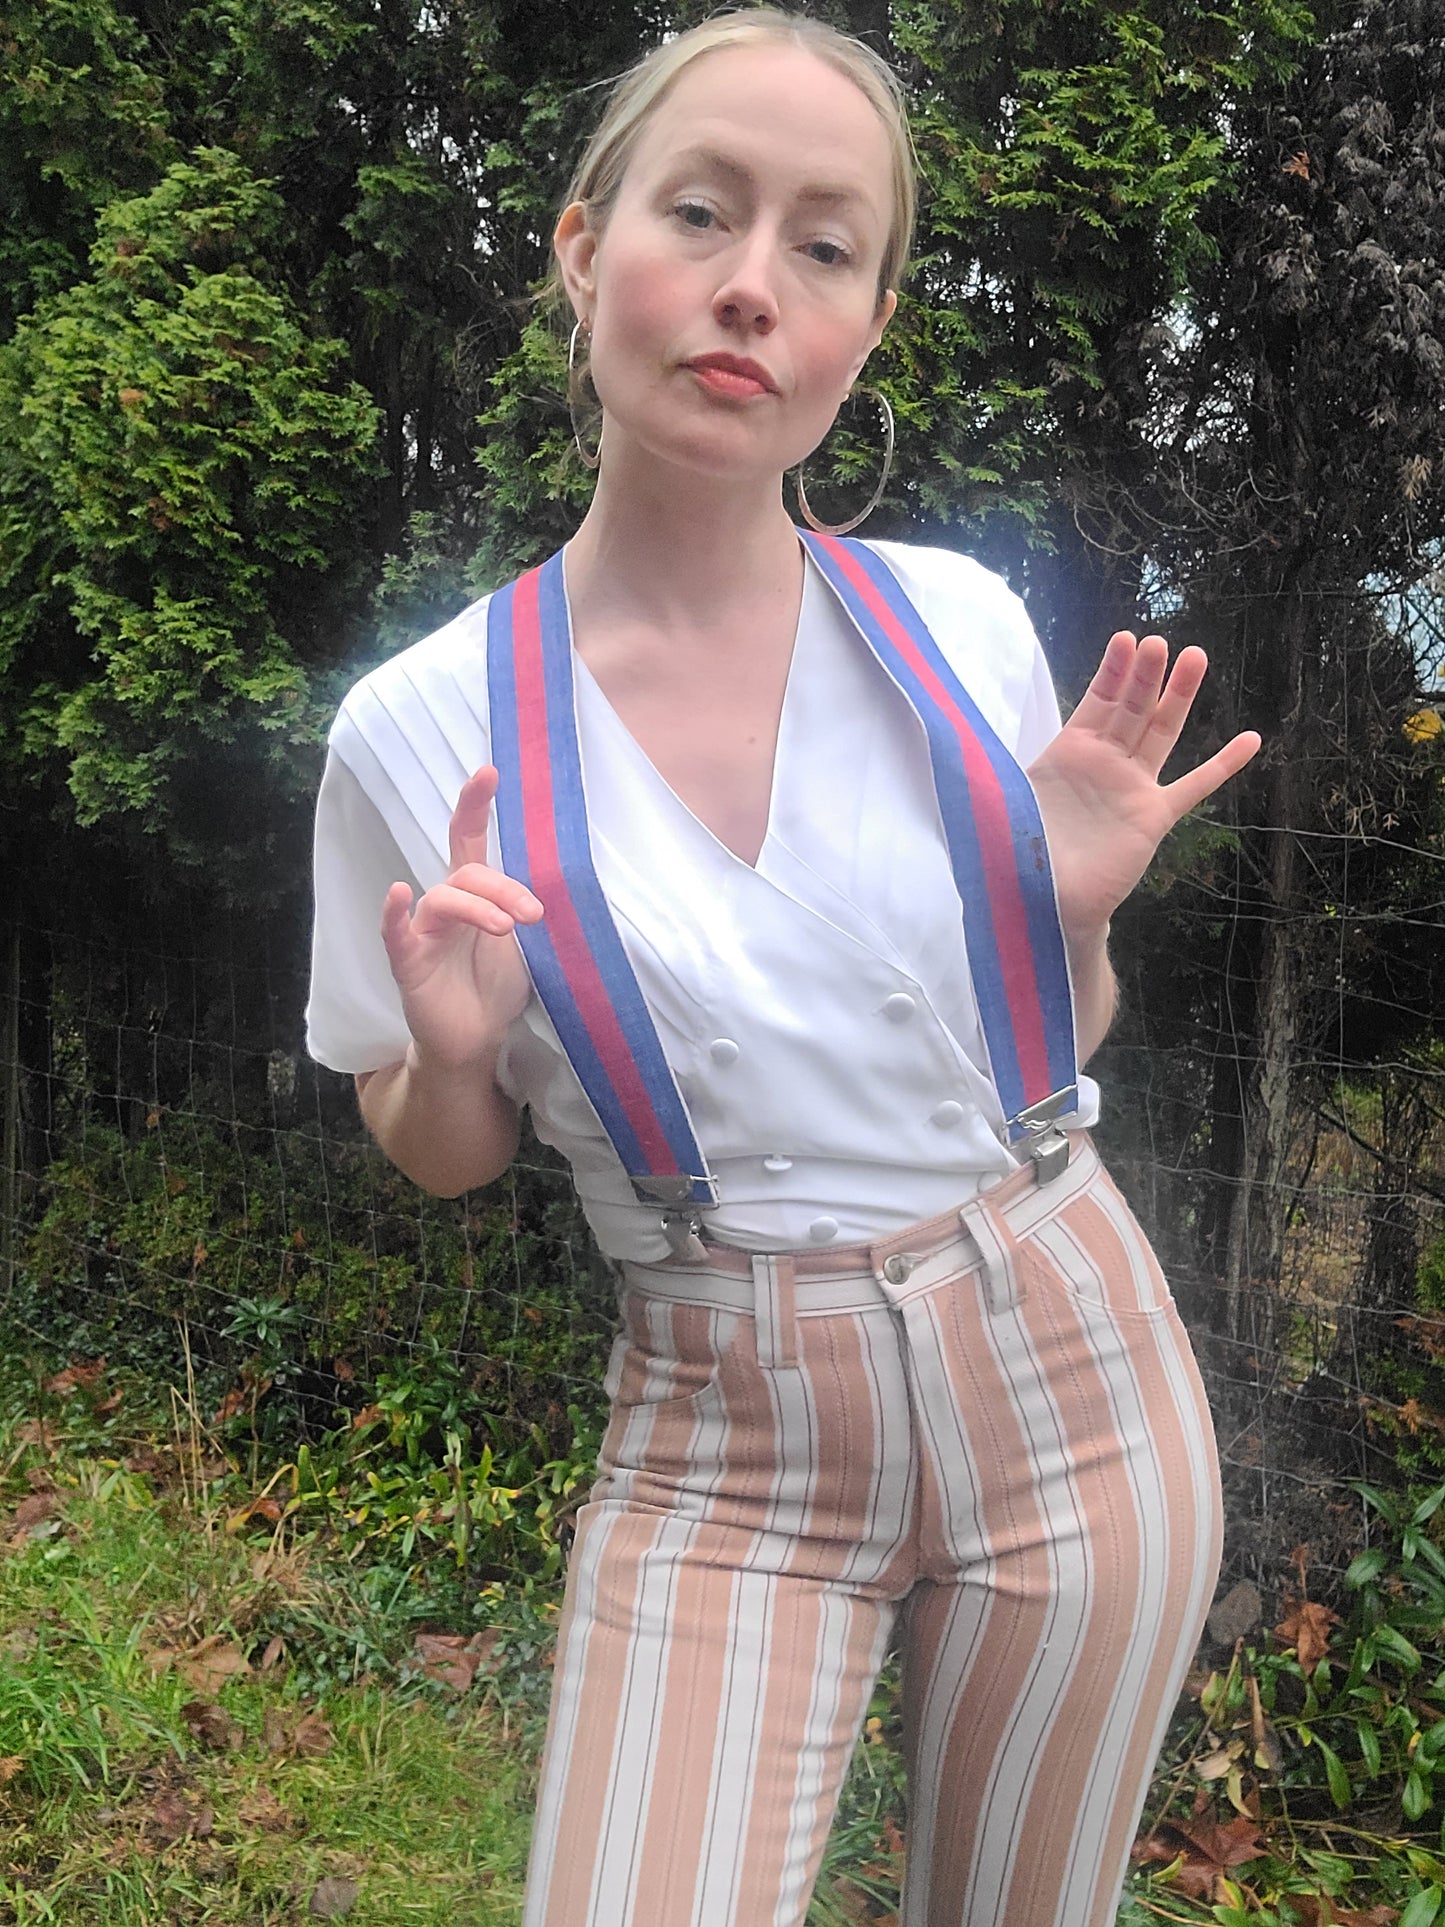 The Vintage Red White and Blue Suspenders